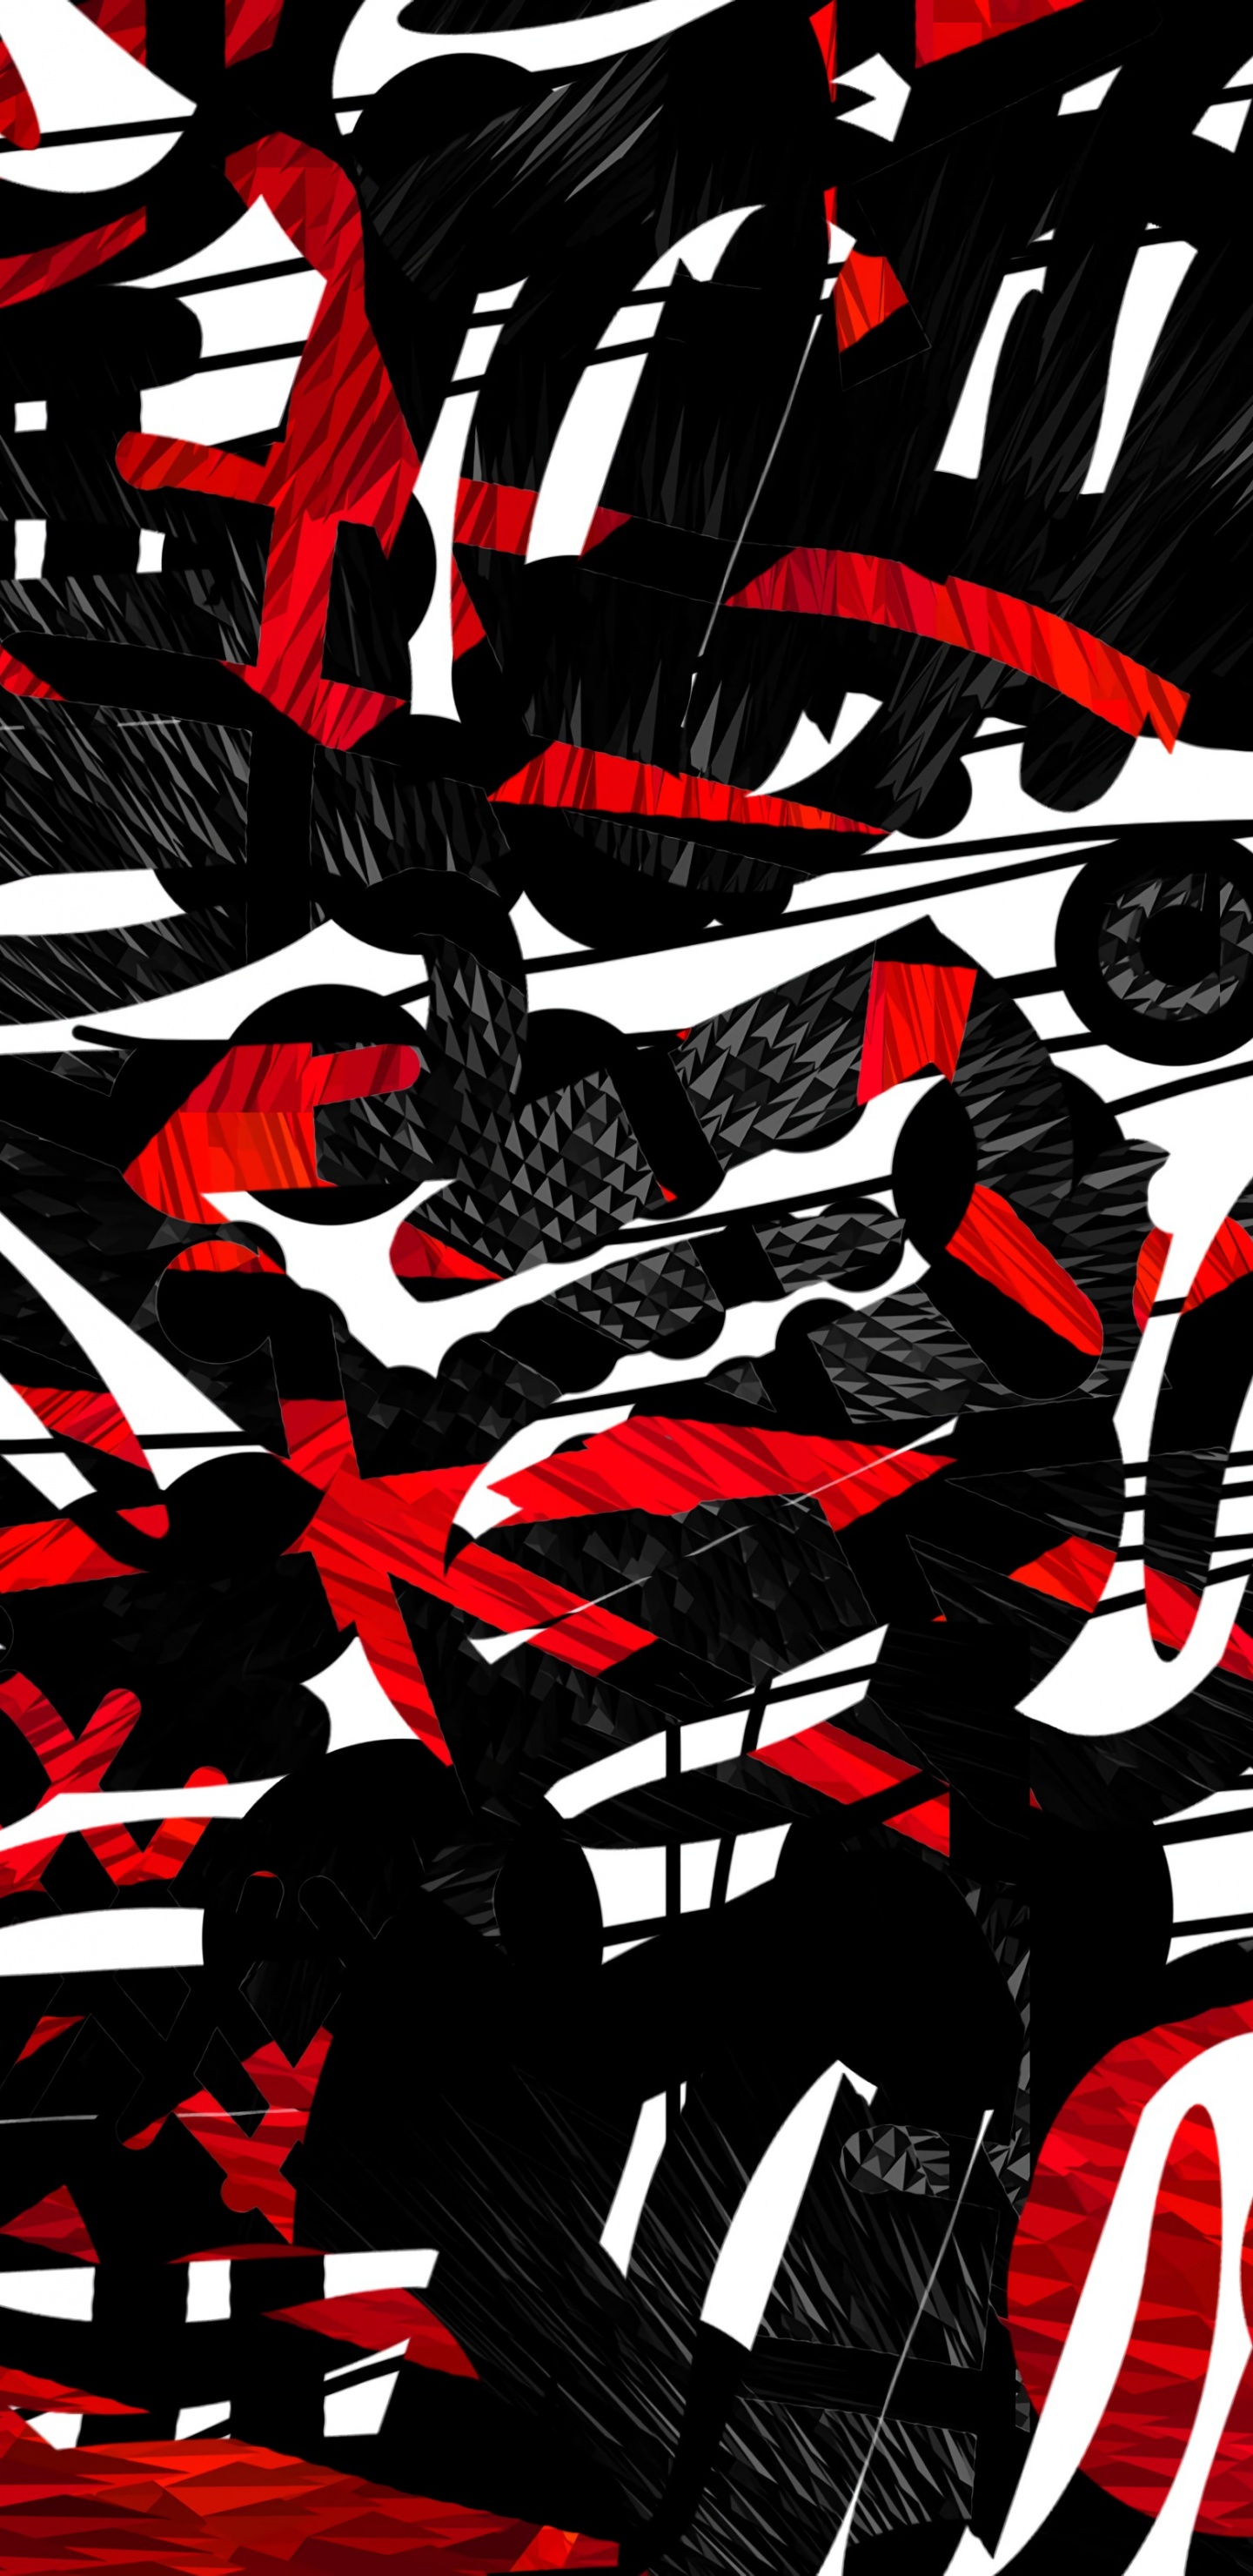 Black White and Red Abstract Painting. Wallpaper in 1440x2960 Resolution